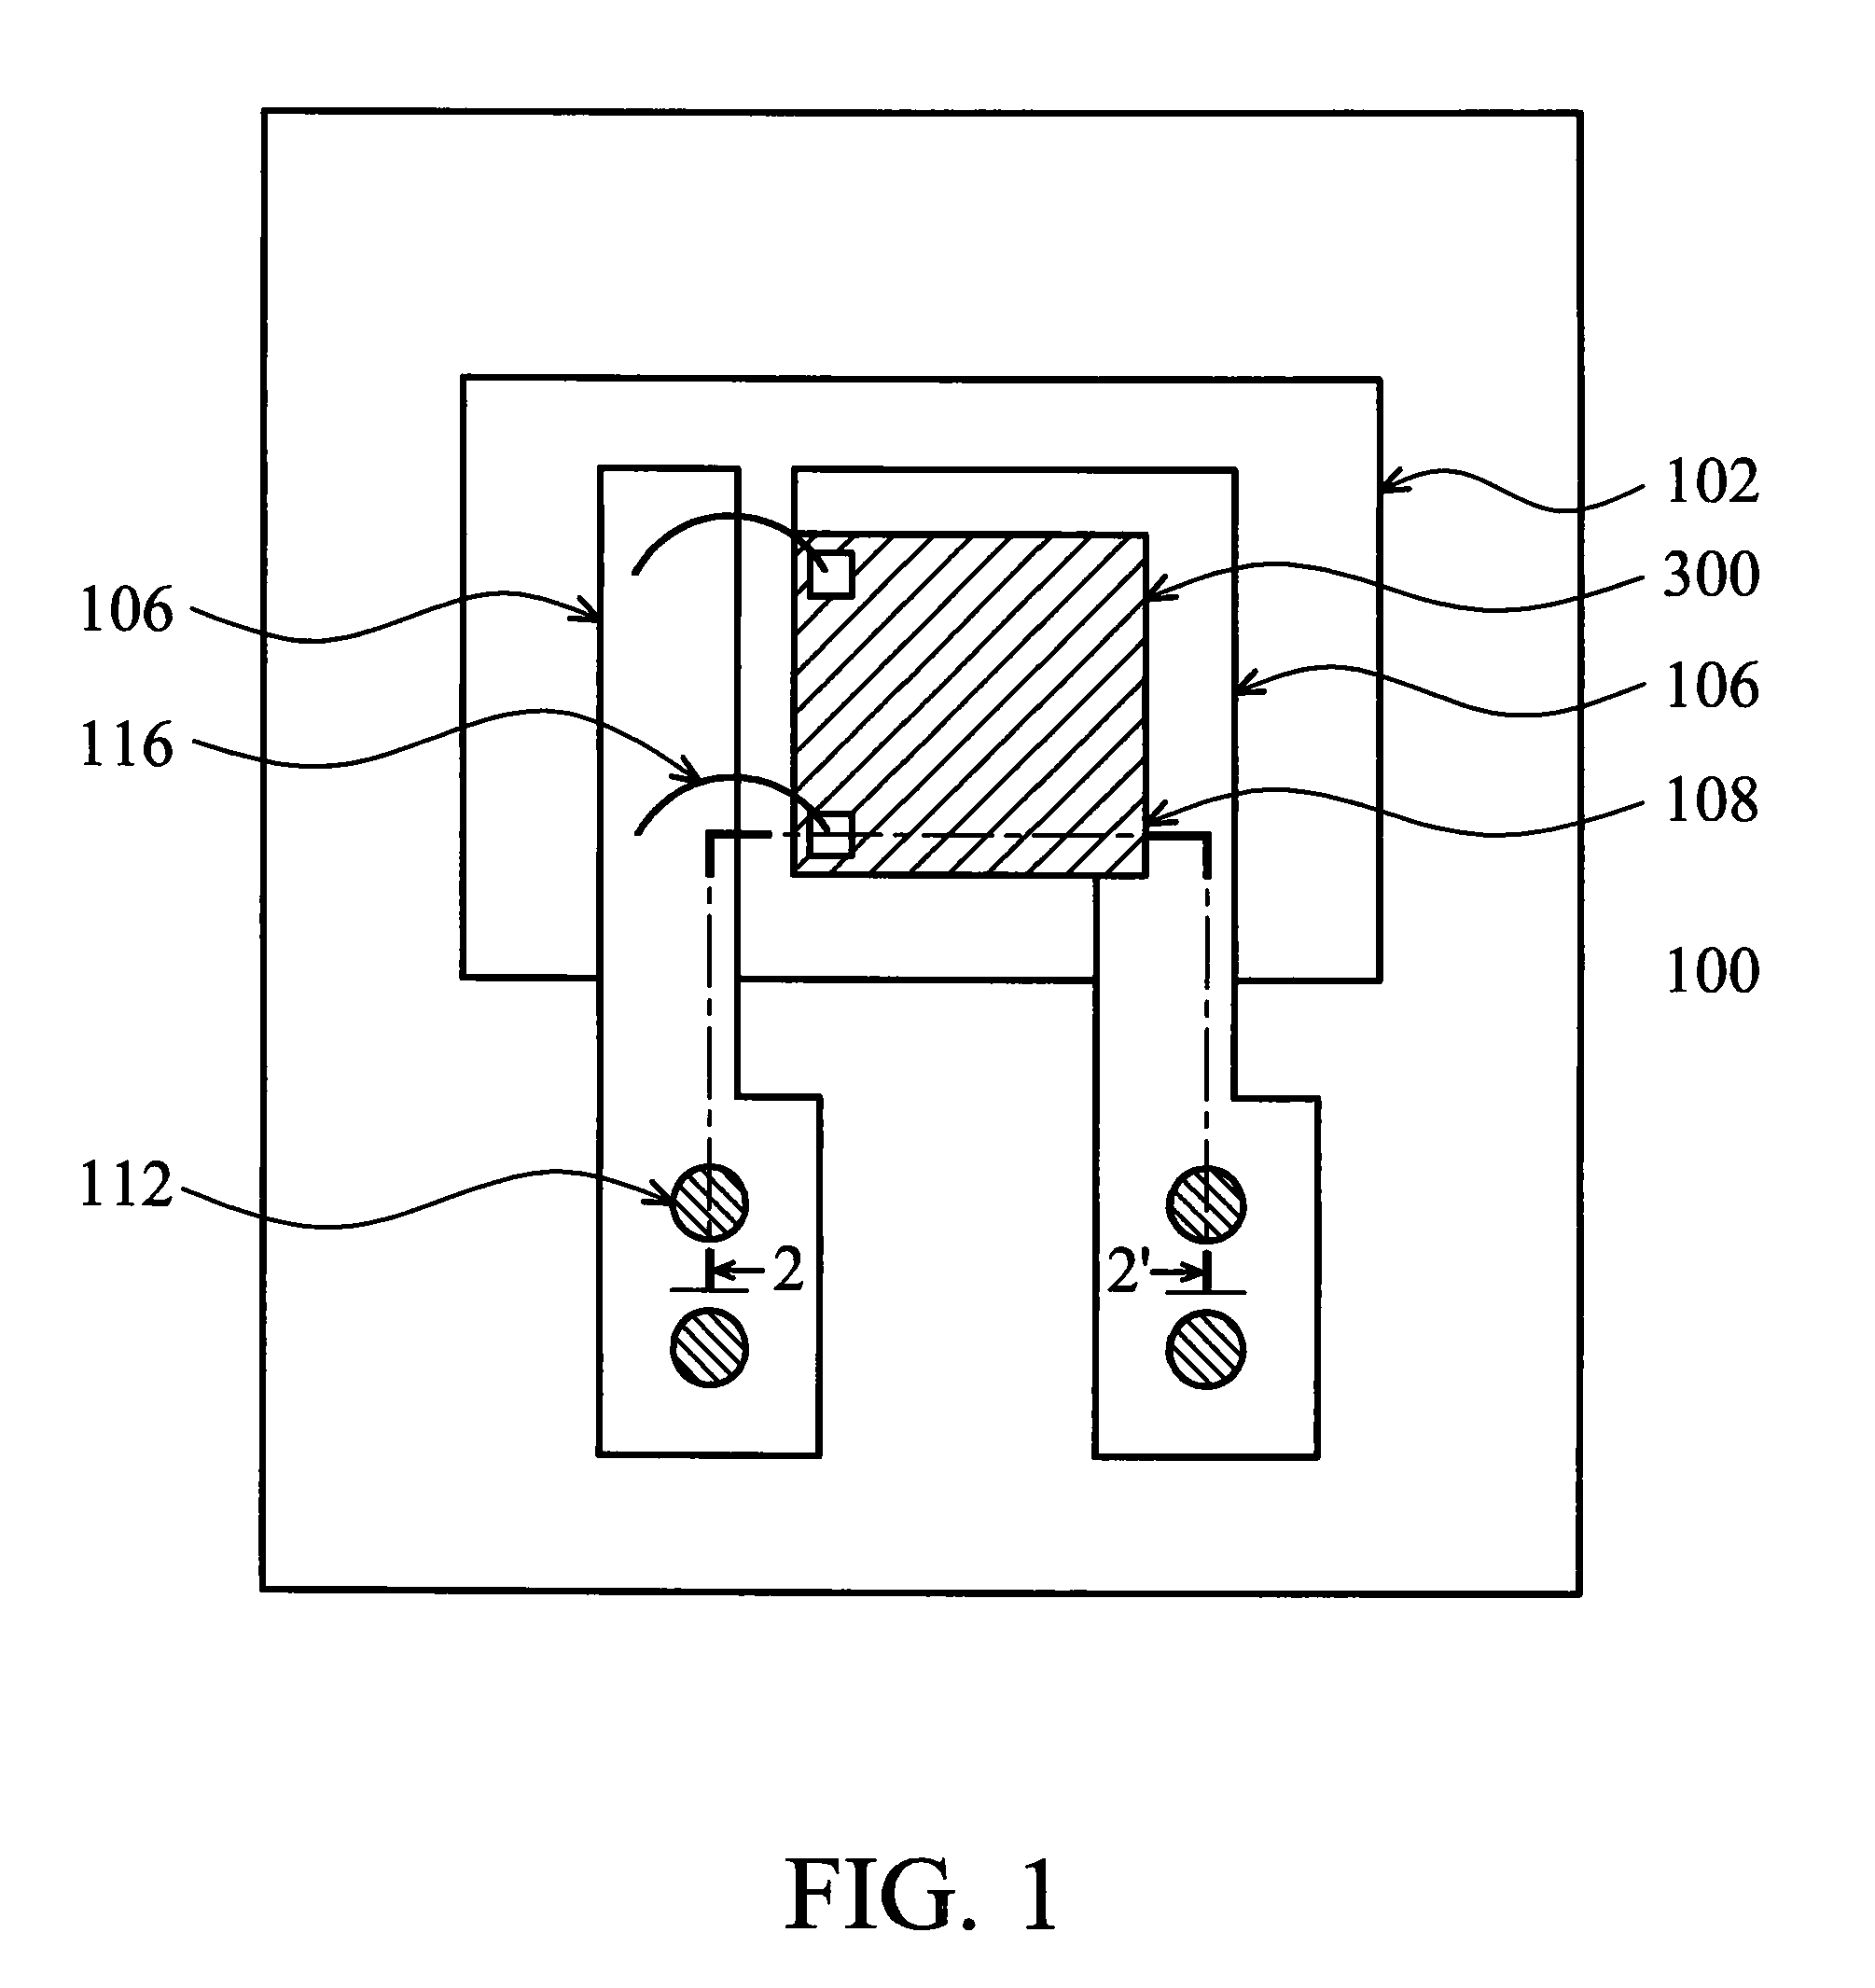 Light-emitting diode package